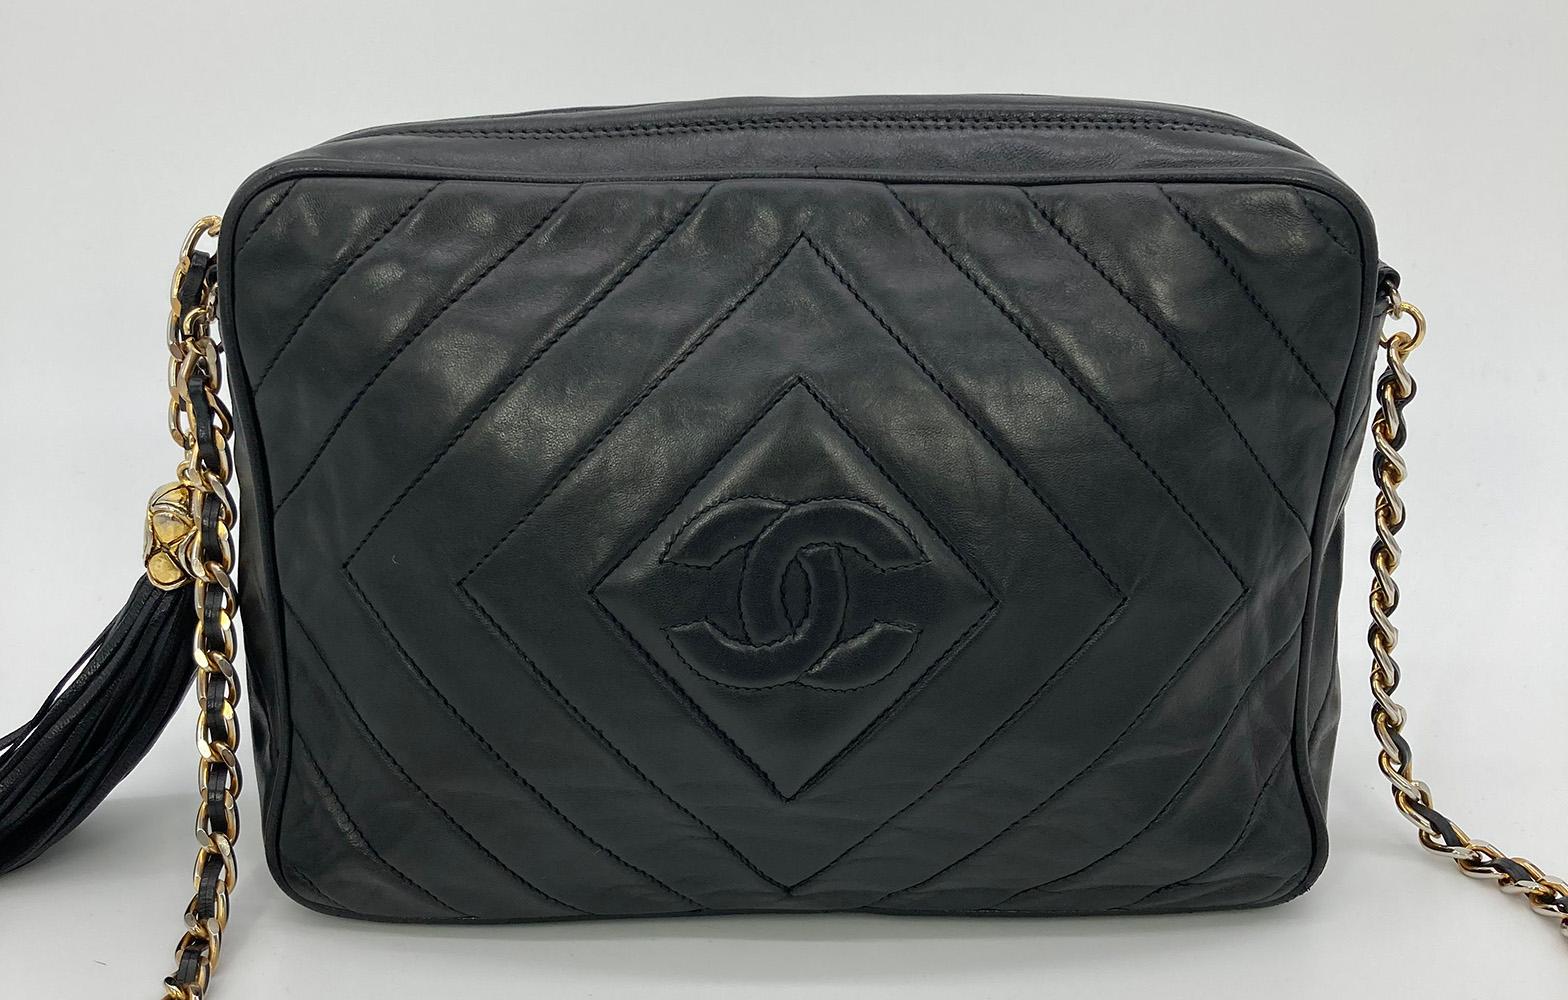 Vintage Chanel Black Diamond Quilted Tassel Camera Bag in good condition. Black diamond quilted lambskin exterior leather with CC logo quilted in center of diamond on front side. Gold hardware and woven chain and leather shoulder strap. Black fringe